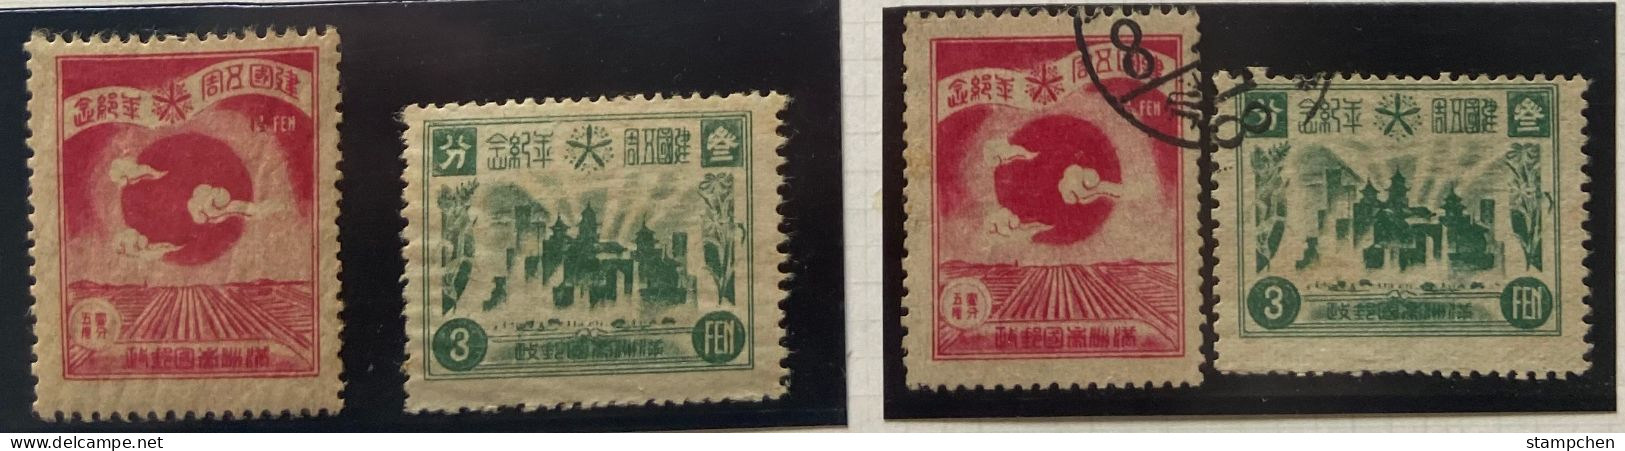 1937 Manchukuo 5th Ann. Of Establishment Stamps Mint & Used - 1932-45 Mandchourie (Mandchoukouo)